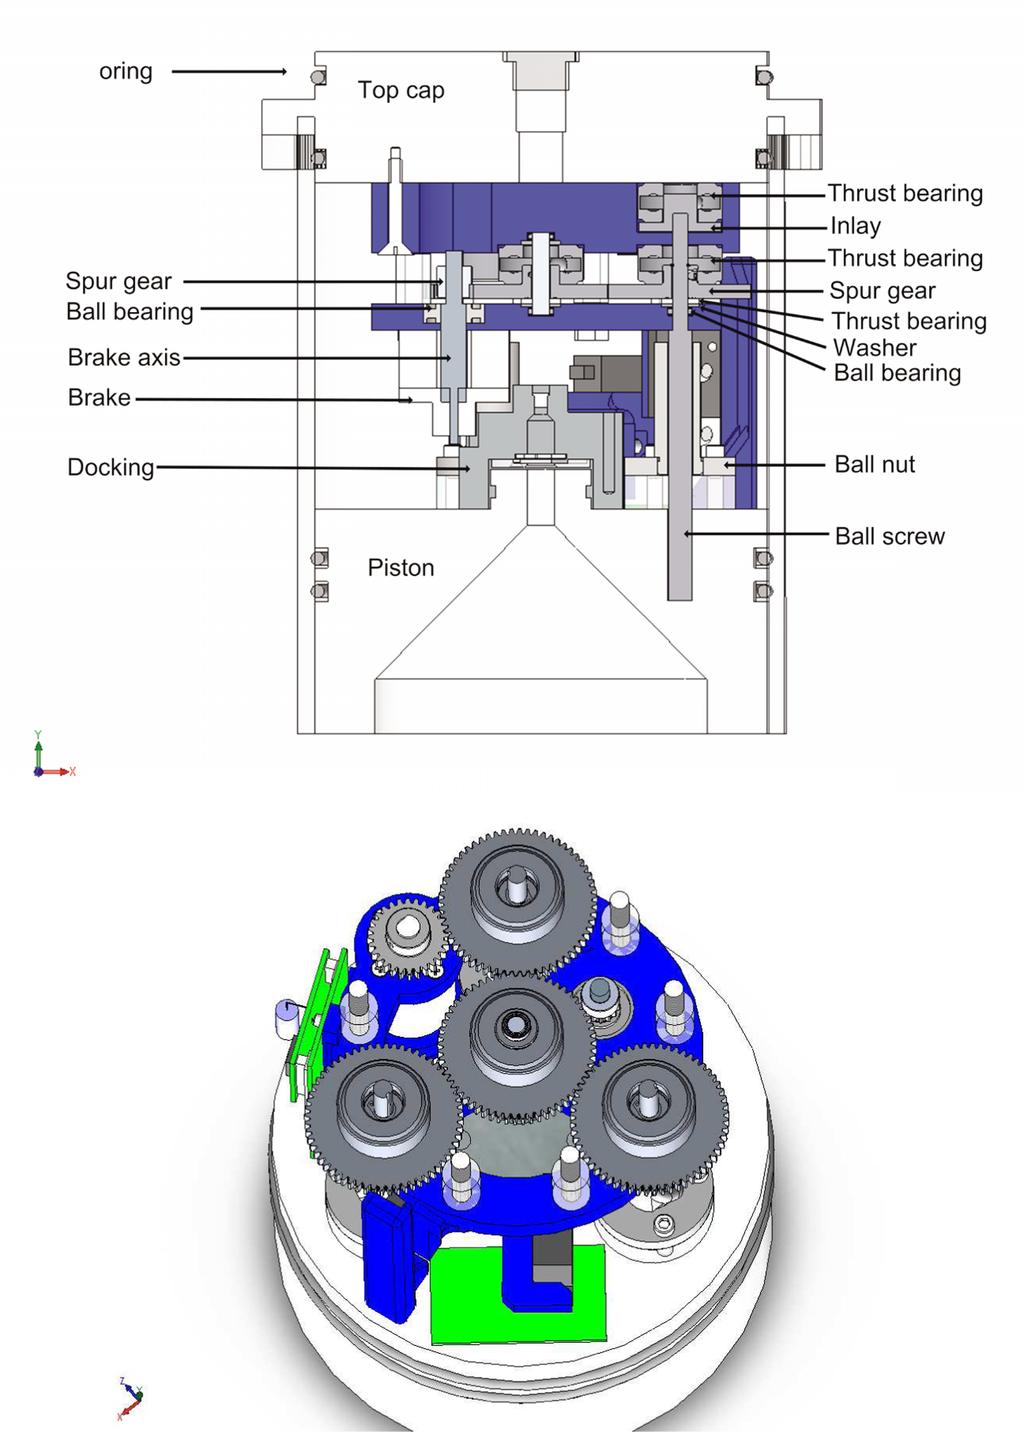 Saving Energy with Buoyancy and Balance Control for Underwater Robots 431 Fig. 2. (Top) Diagram of the buoyancy control mechanism. (Bottom) The gear mechanism used in the buoyancy control module.